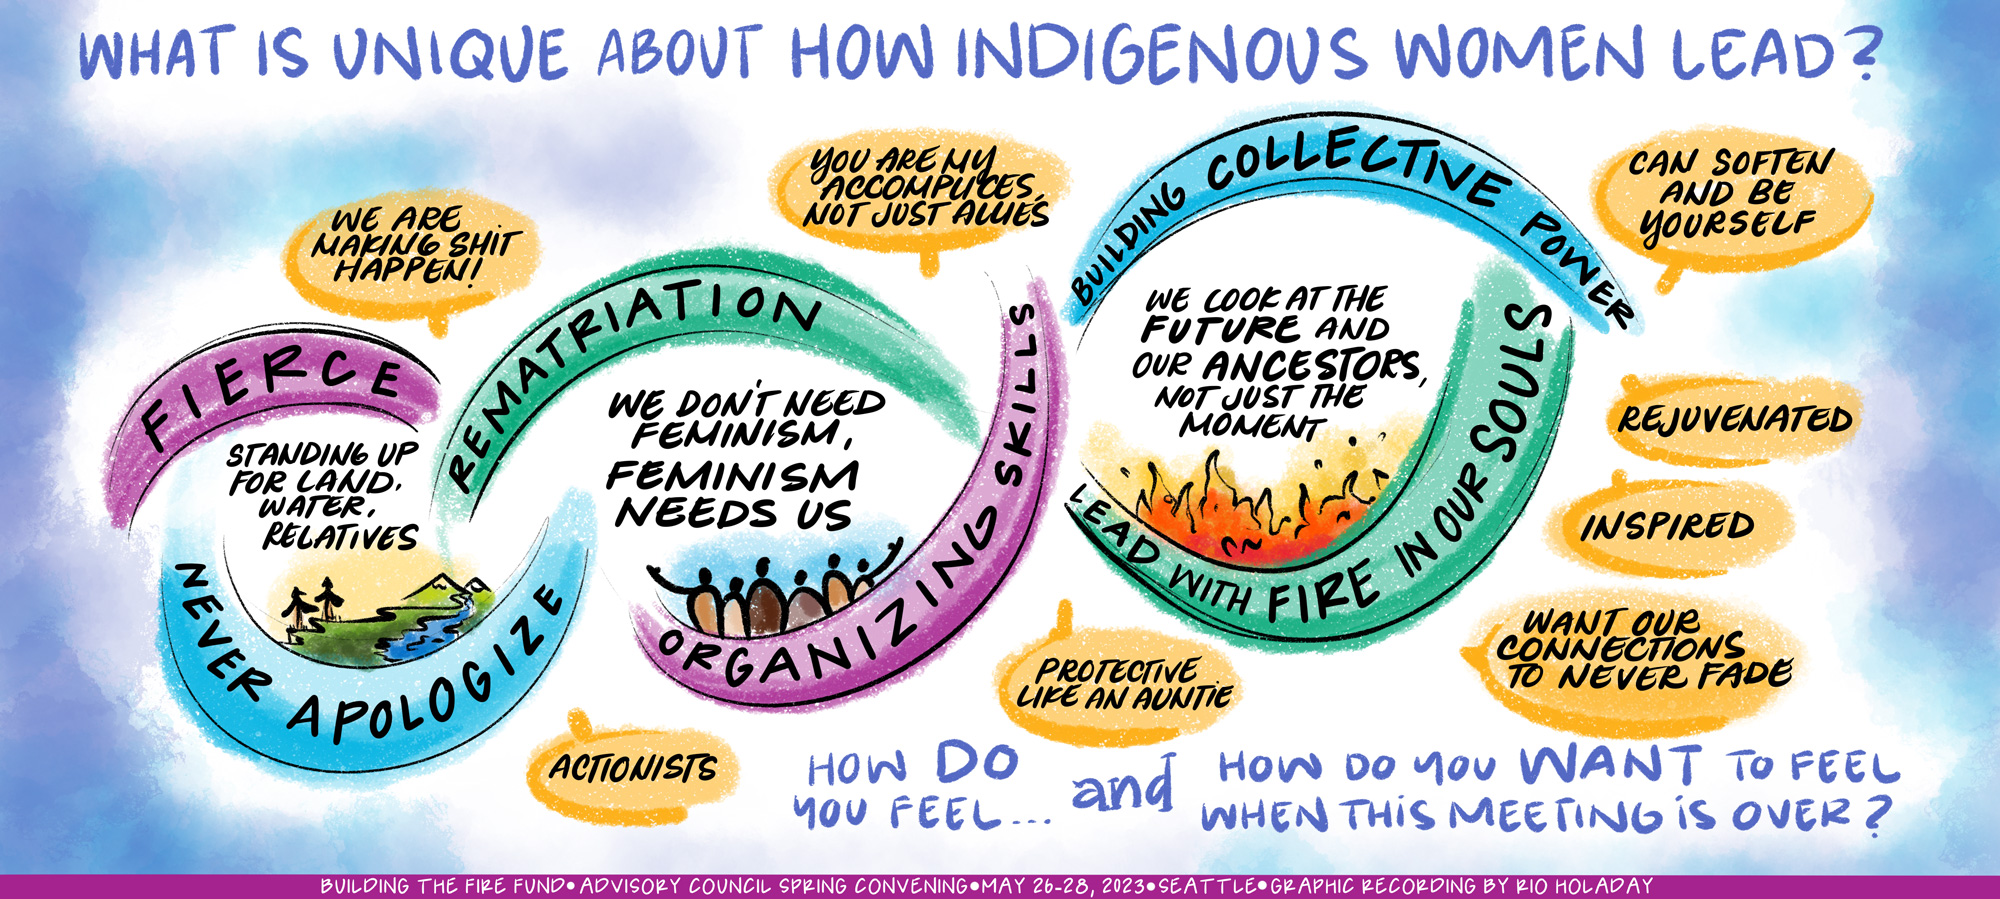 What Is Unique About How Indigenous Women Lead graphic with phrases such as building collective power, rematriation and never apologize